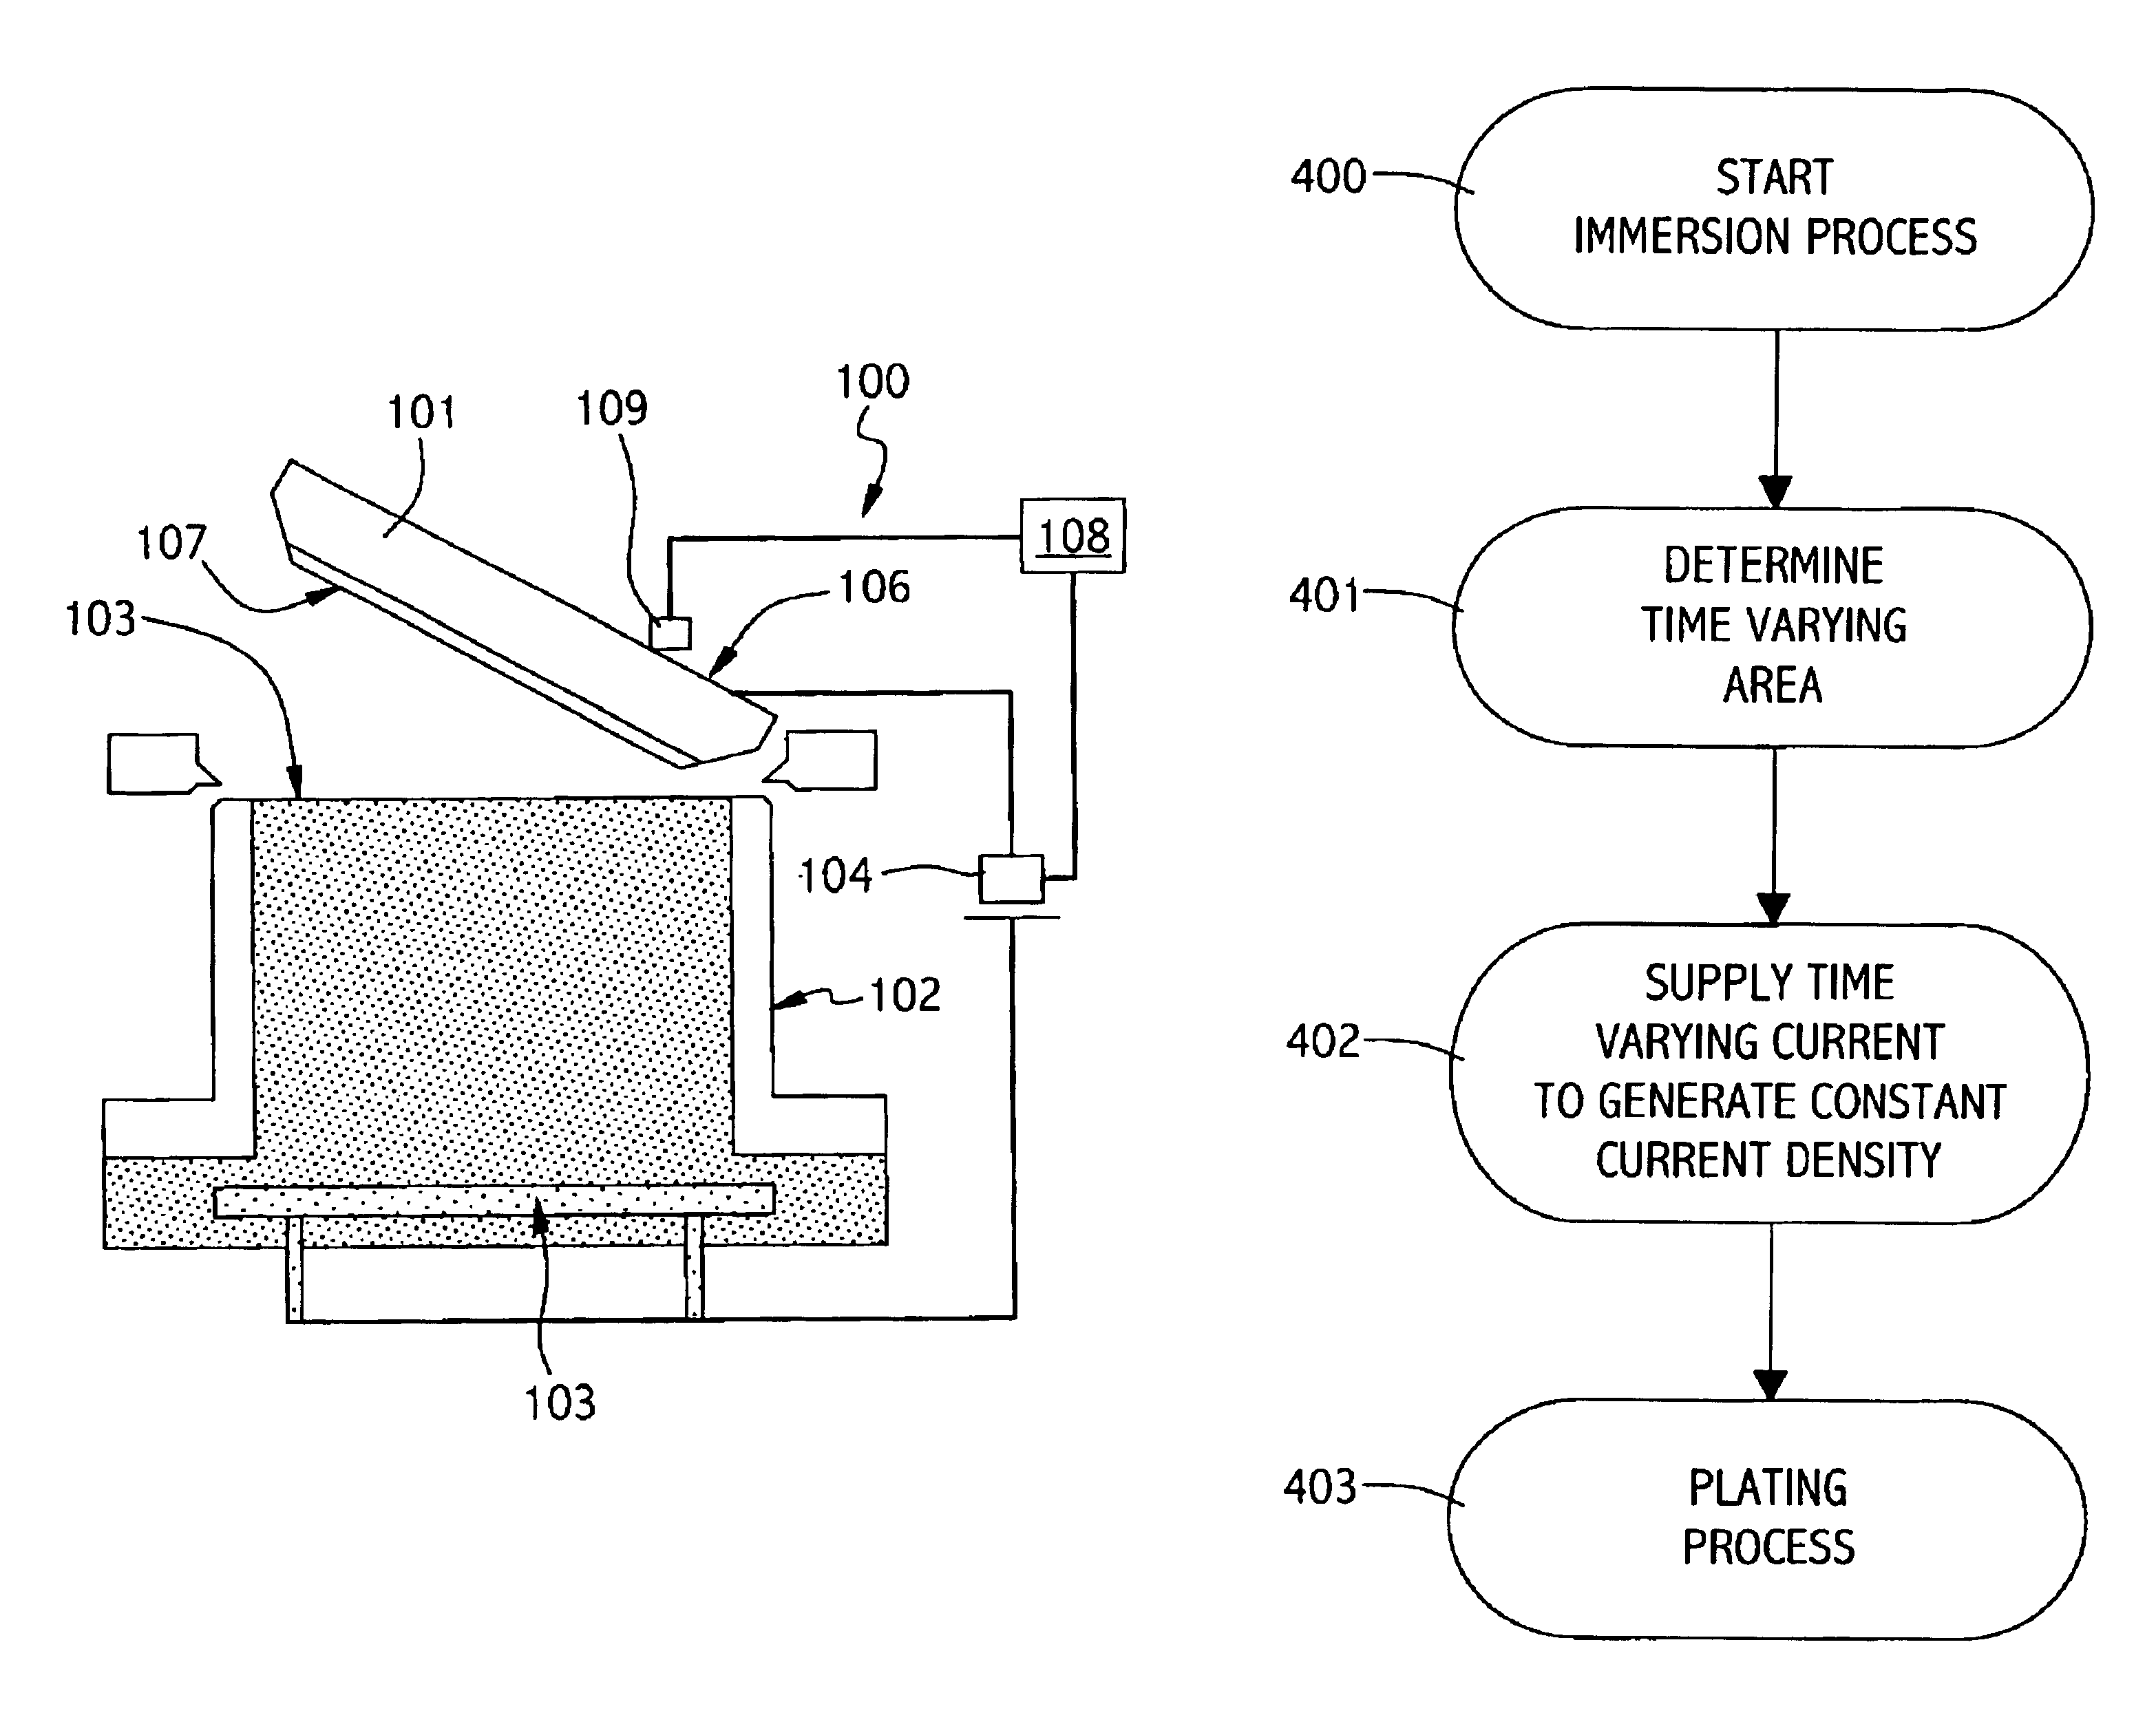 Method for regulating the electrical power applied to a substrate during an immersion process